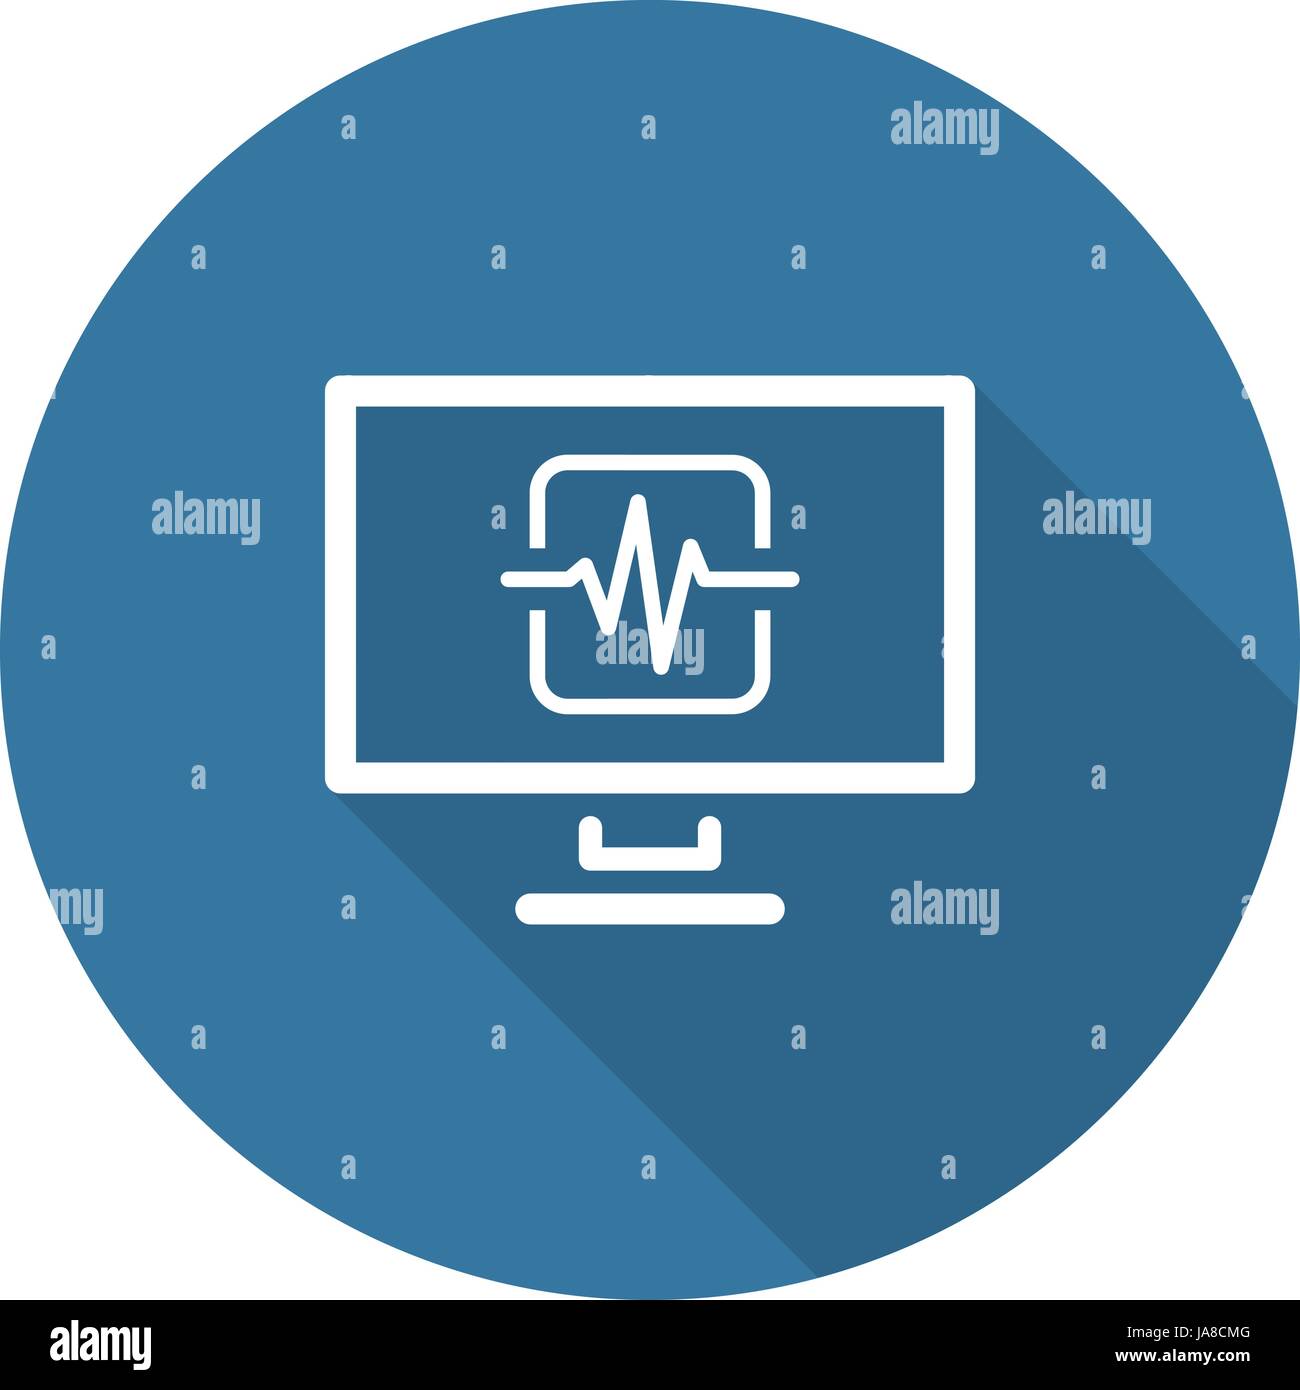 Cardiogram and Medical Services Icon. Flat Design. Stock Vector